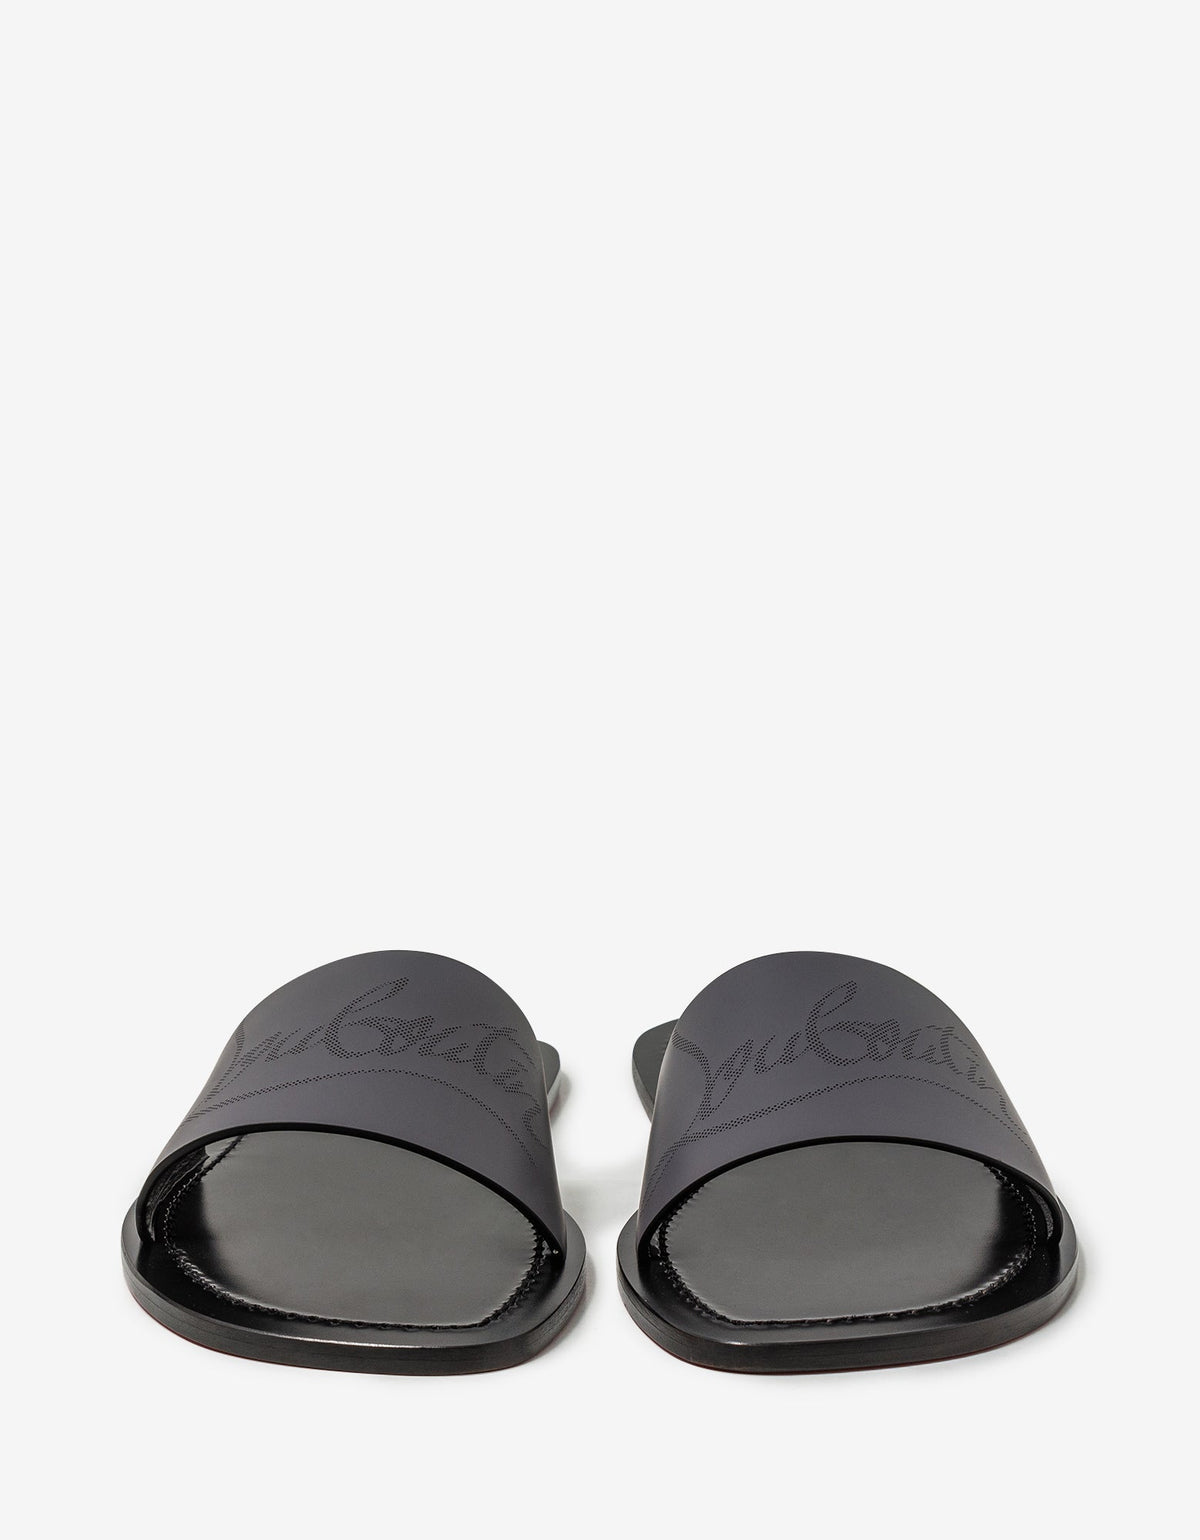 Christian Louboutin Coolraoul Grey Leather Slide Sandals